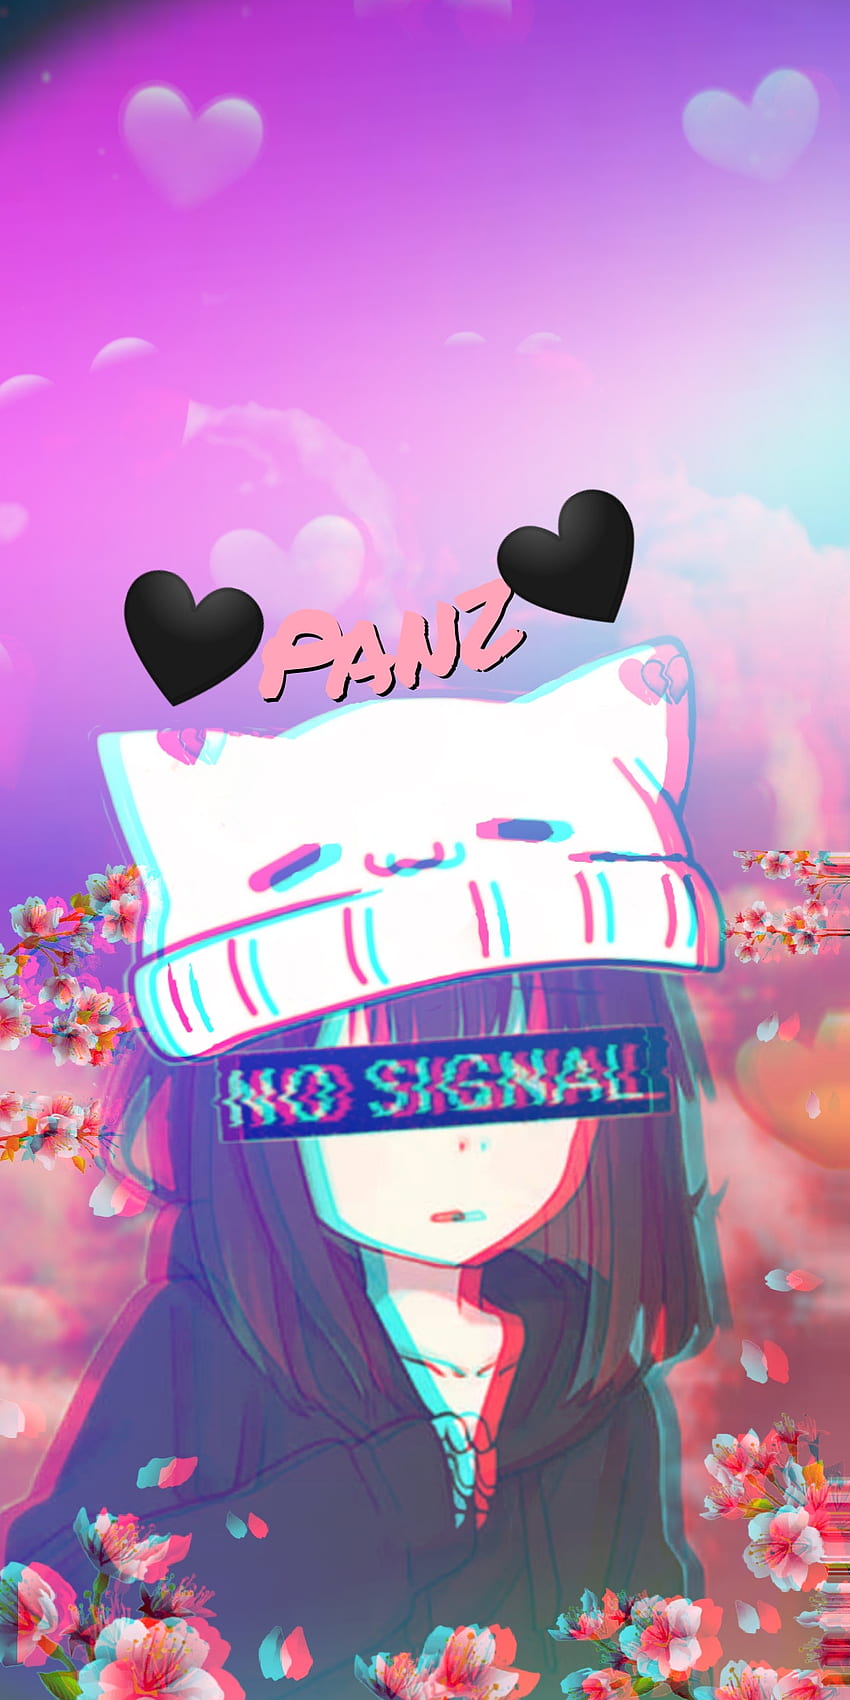 4 Signal Live Wallpapers, Animated Wallpapers - MoeWalls